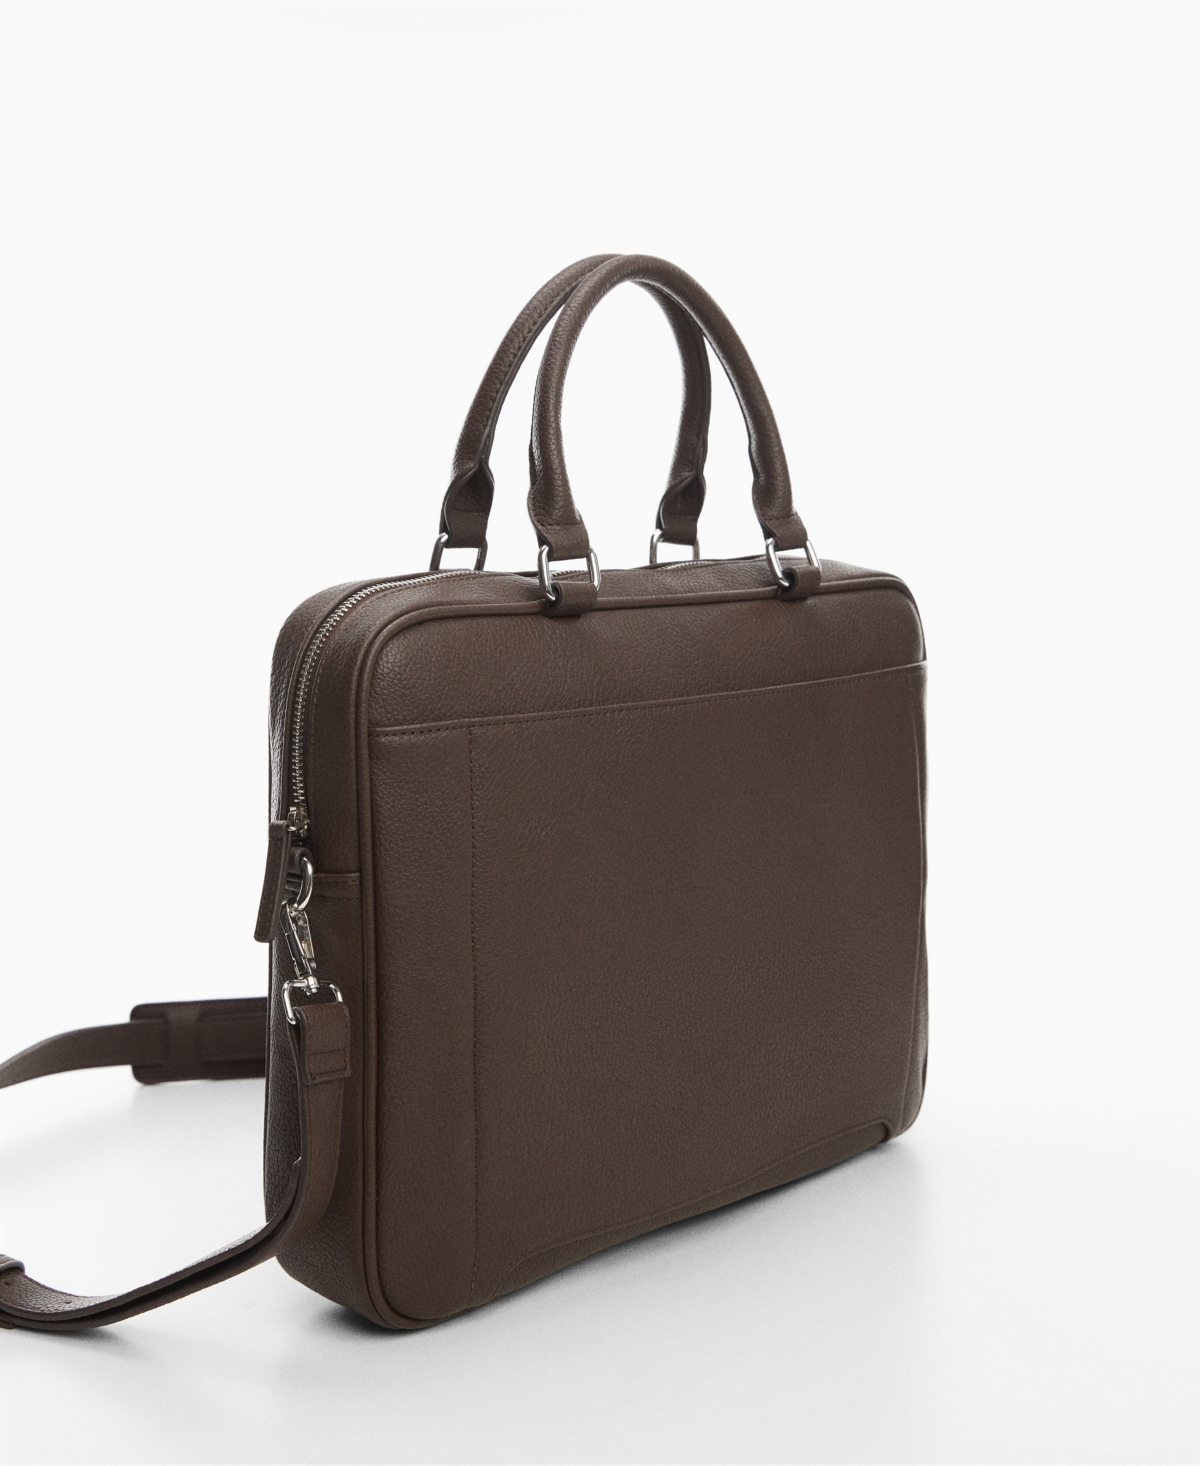 Men's Leather-Effect Briefcase - Chocolate